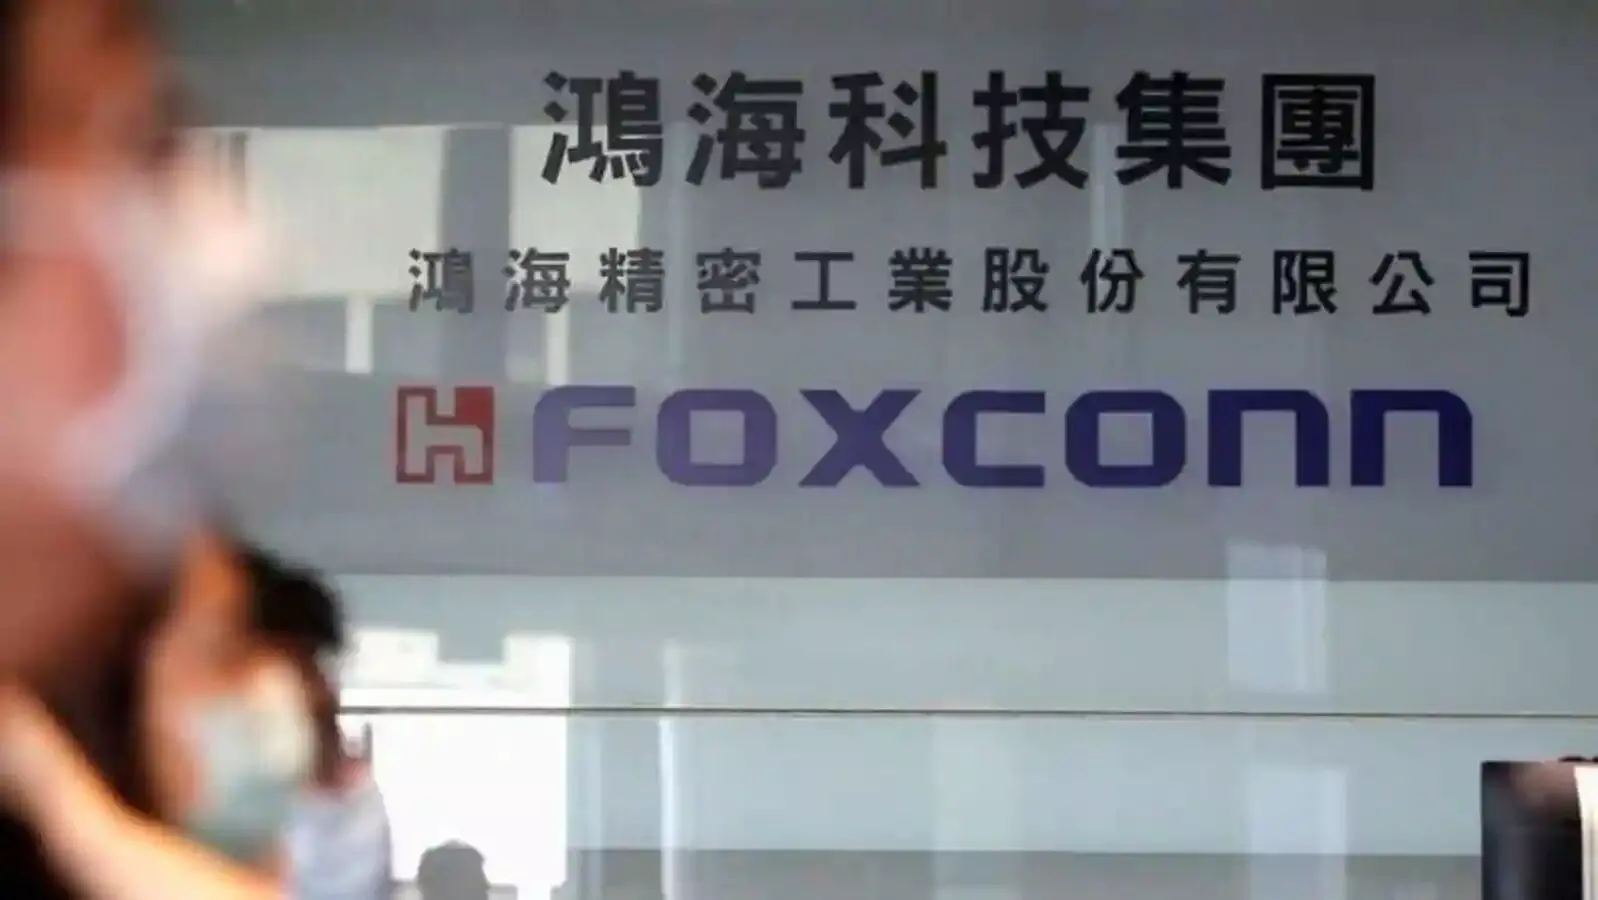 Foxconn to upgrade infra facilities and resume production soon